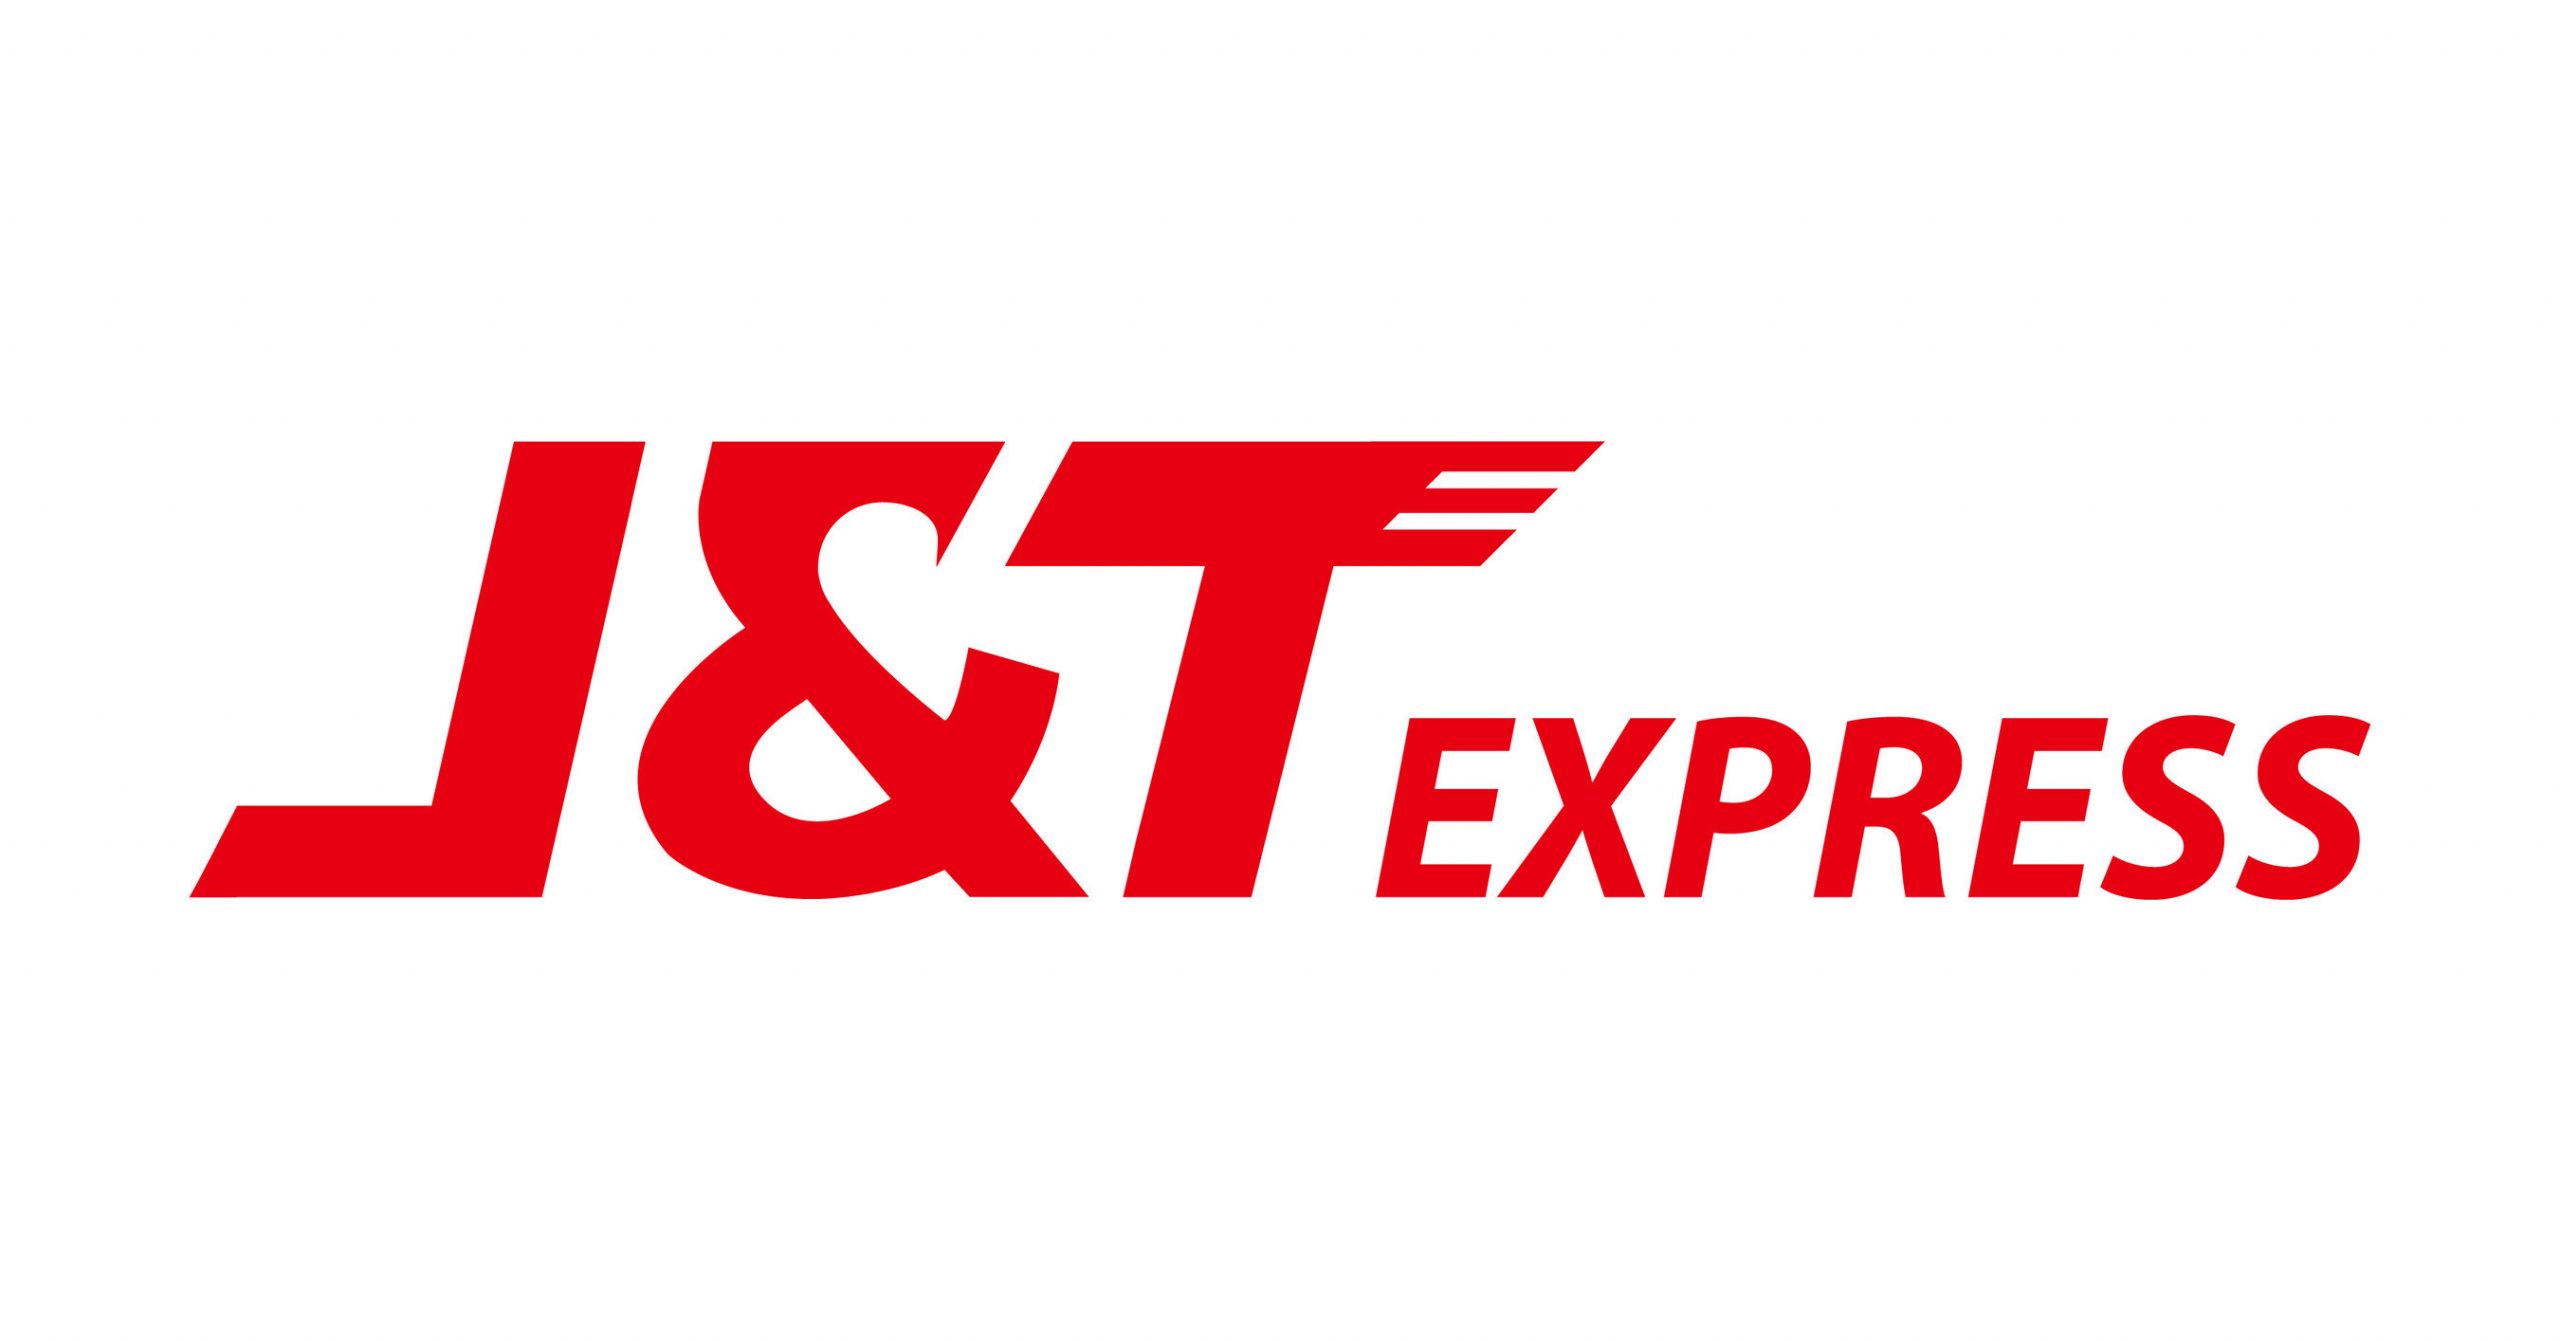 J&T Express wants Brand Manager